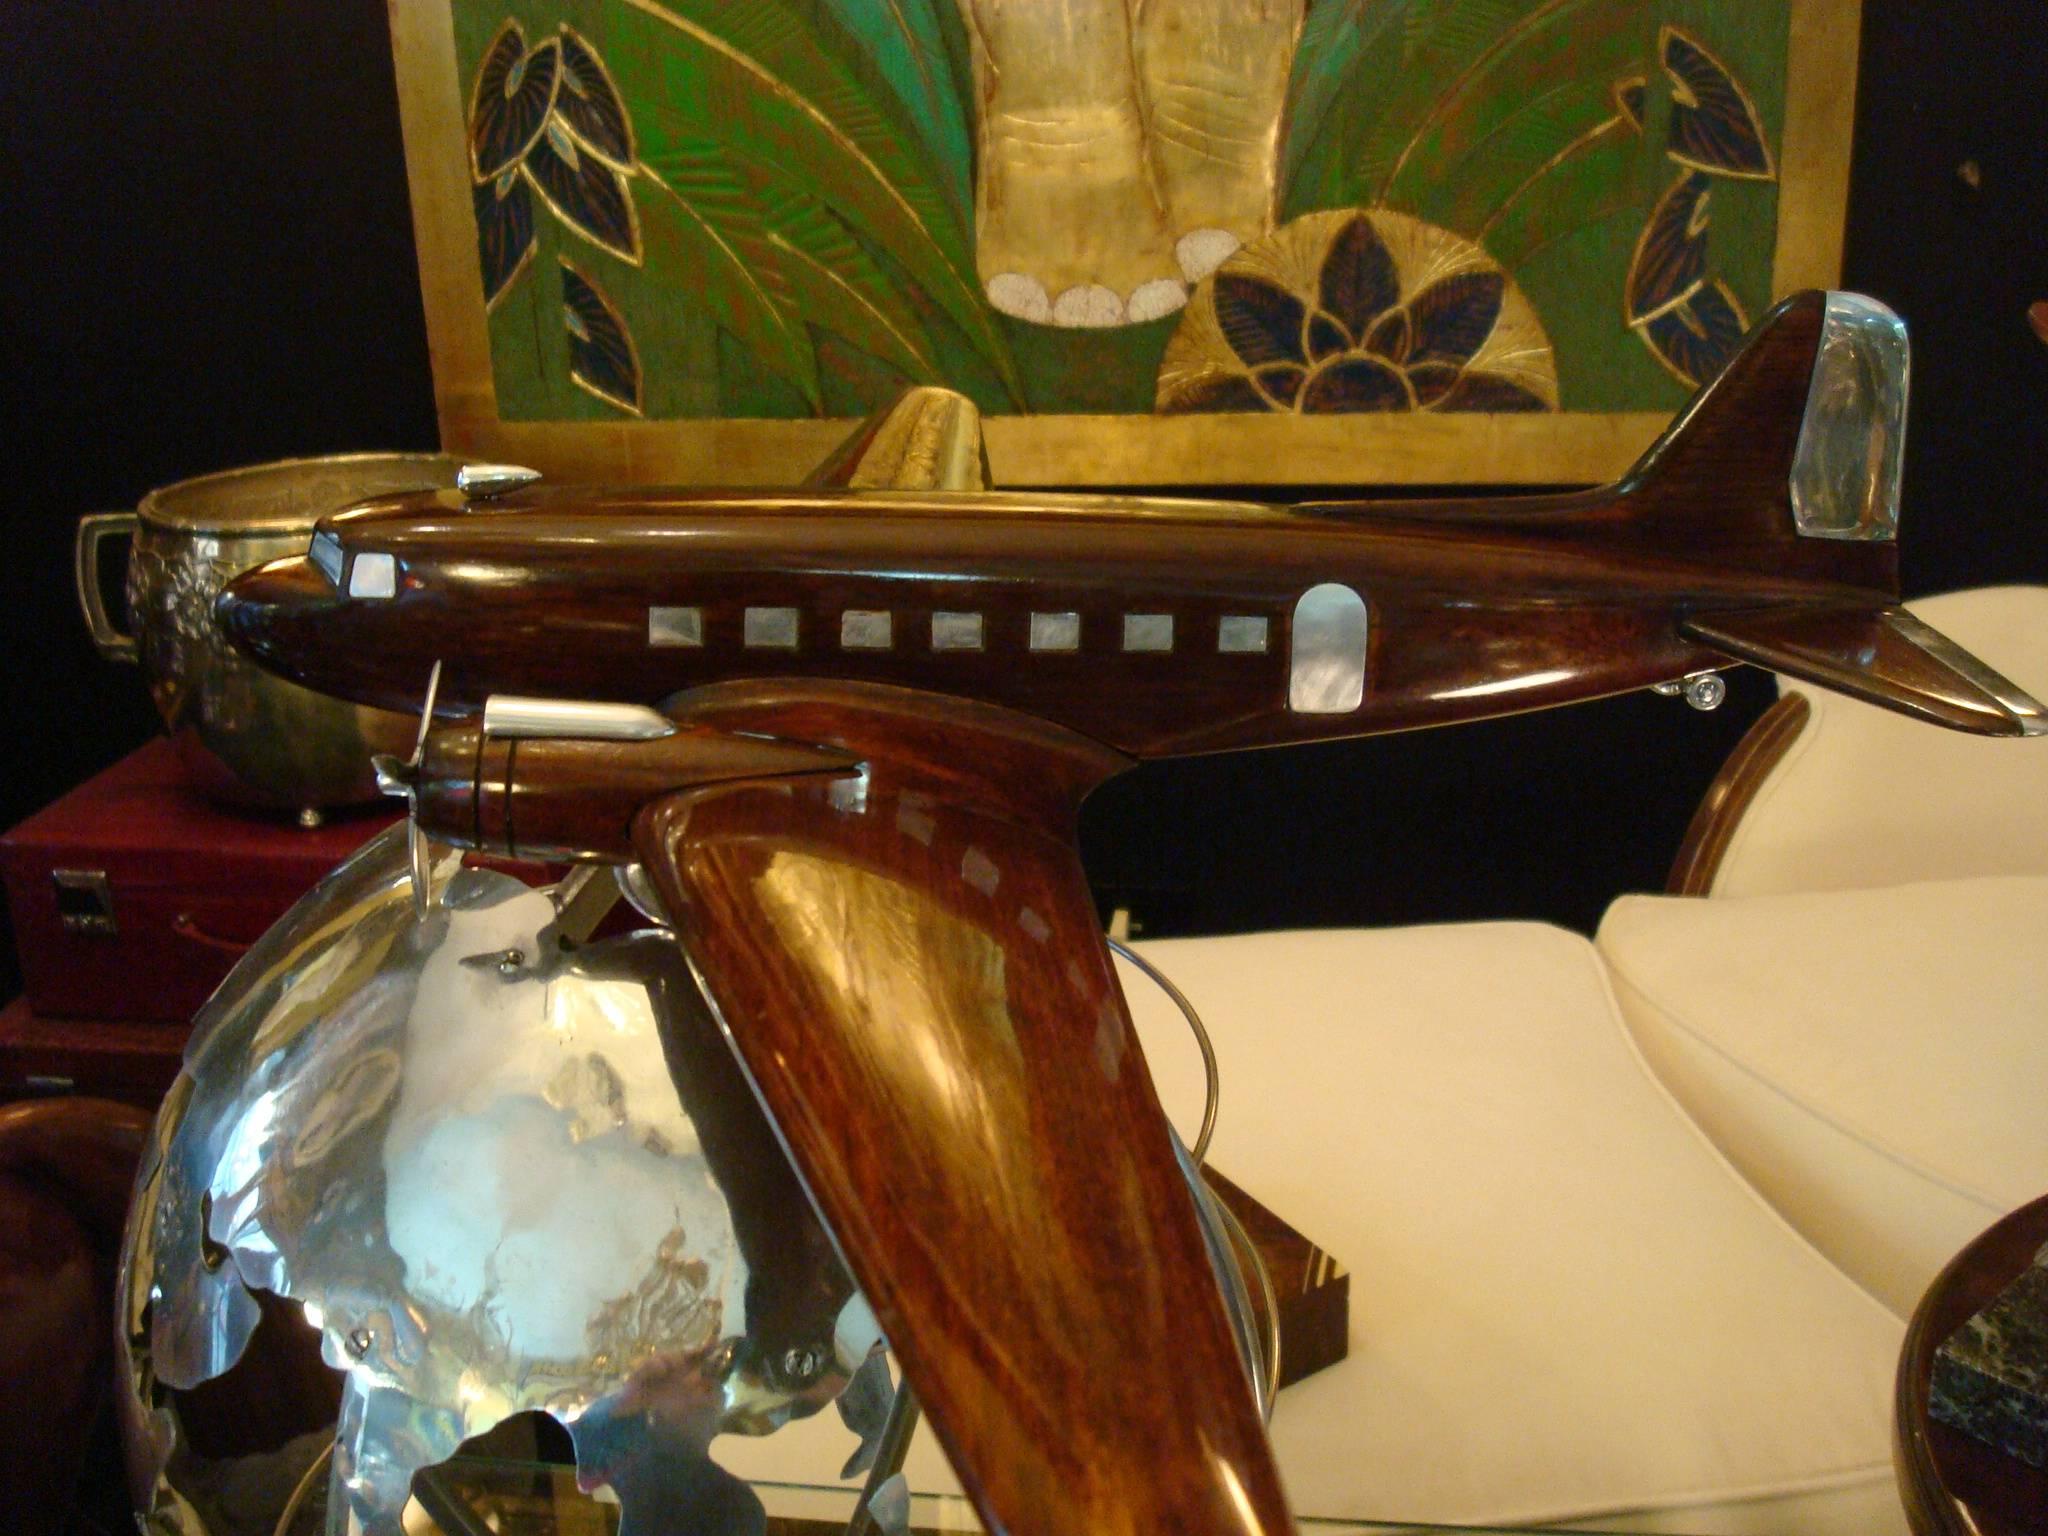 Art Deco - Modernism Airline model. Fantastic Douglas DC3 wooden and aluminium model. Lovely Aviation item. A Pan American Airways travel agency model. Made for Latin America. Airplane over the world. The base has a metal label.